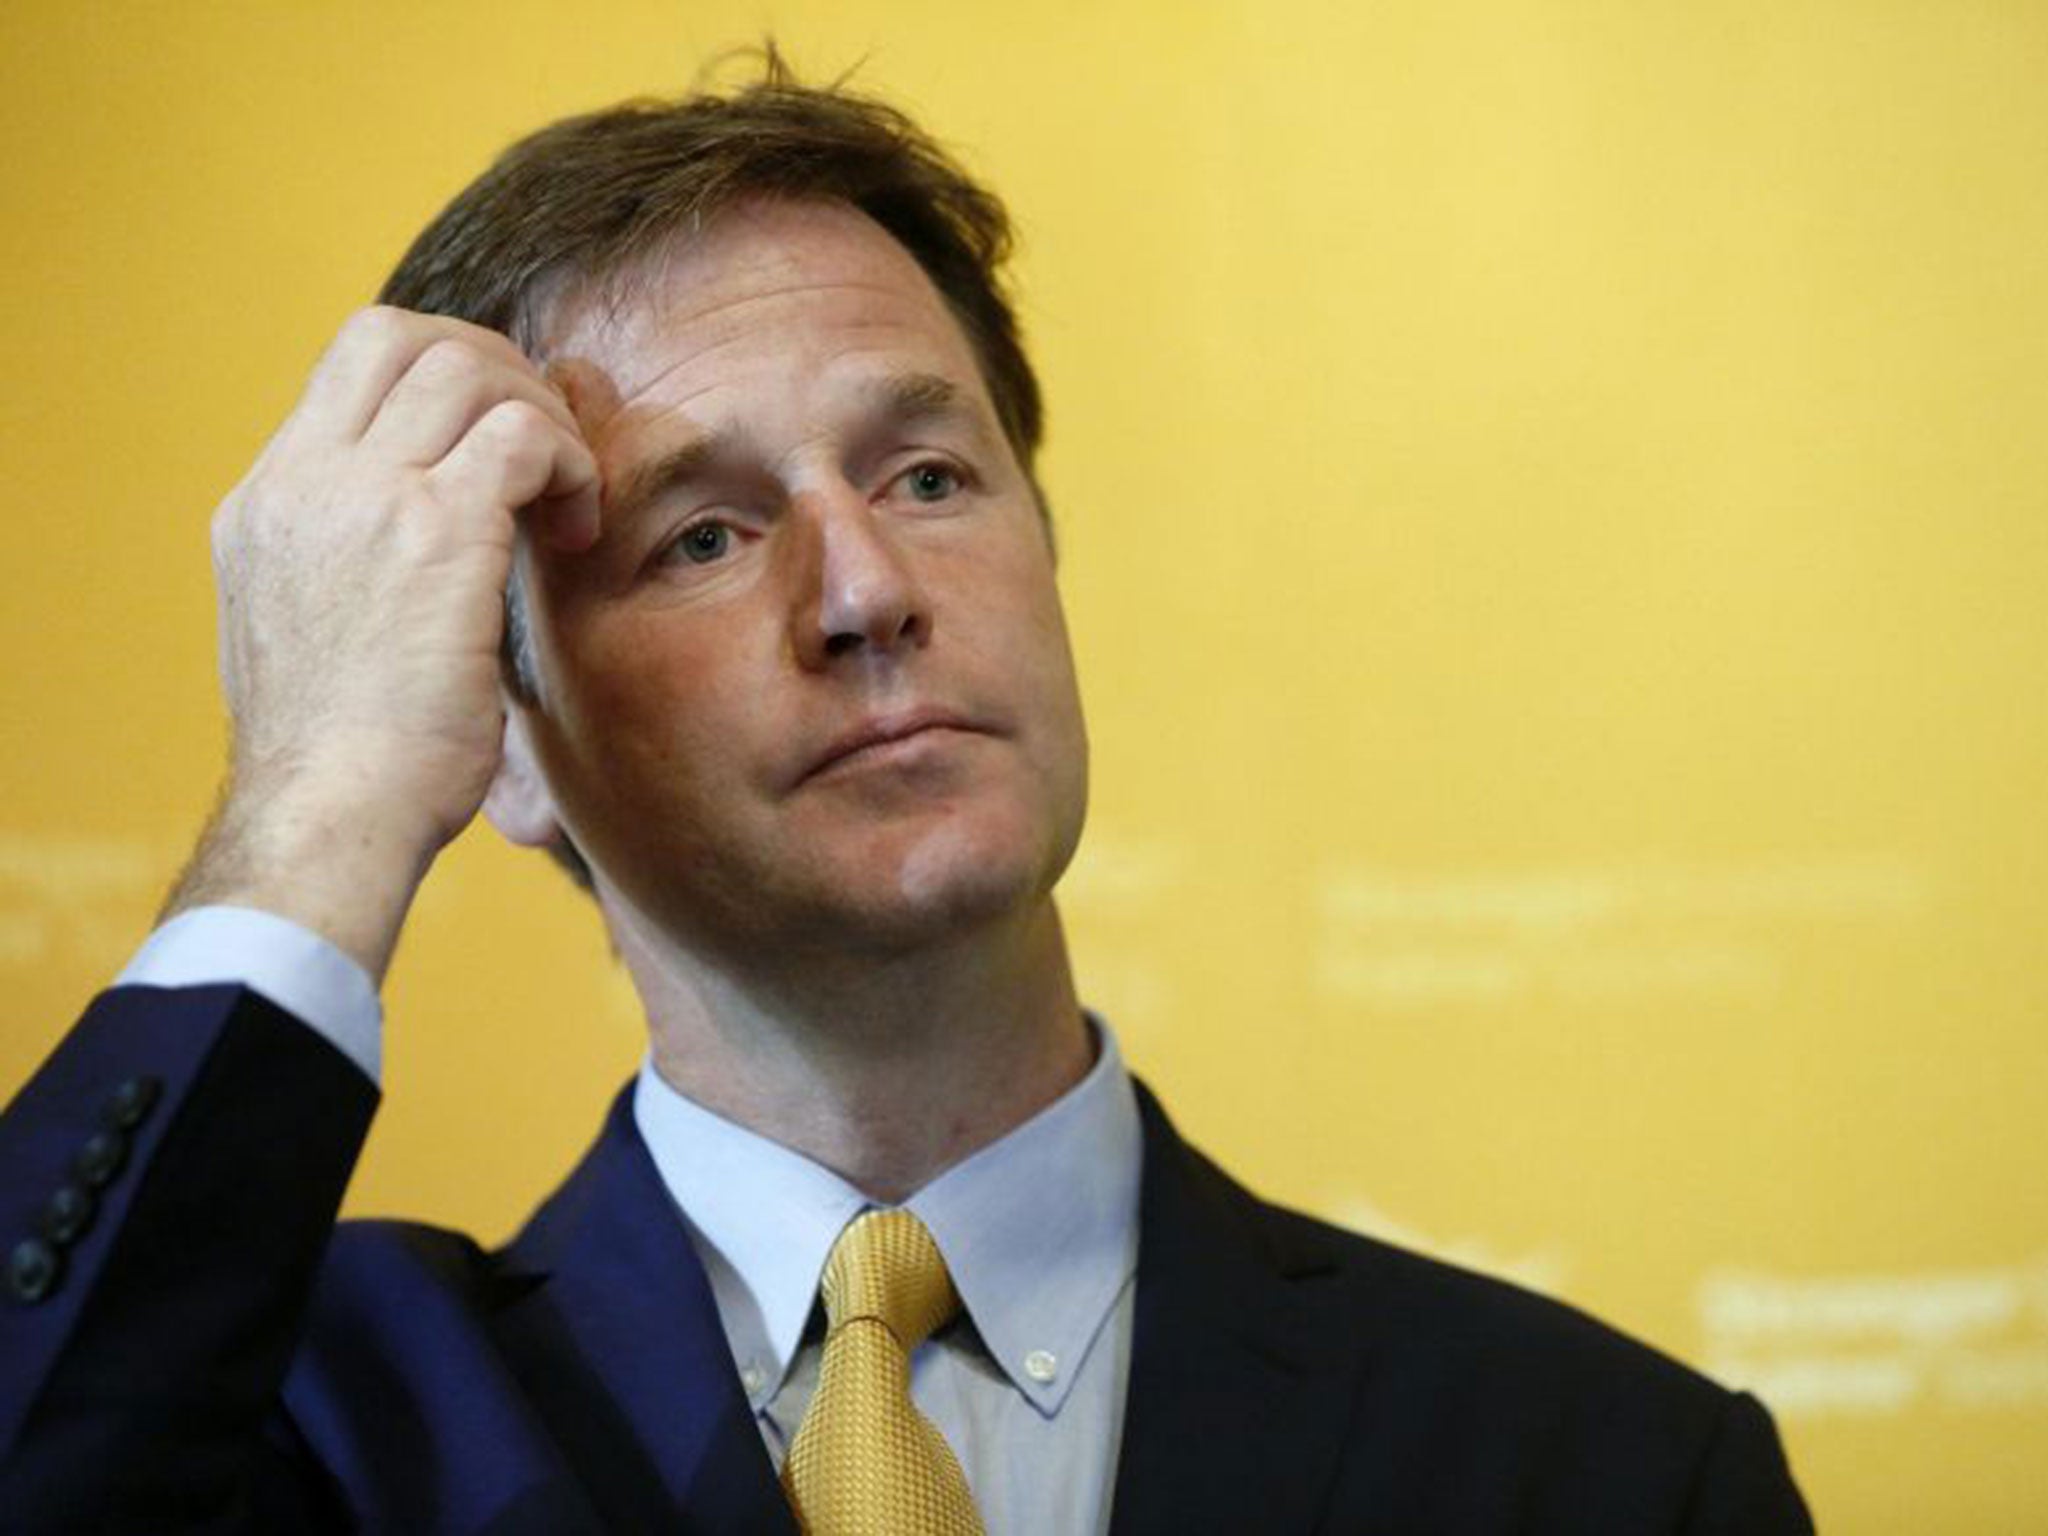 Broken pledge: Clegg says Tory rebels defied coalition contract